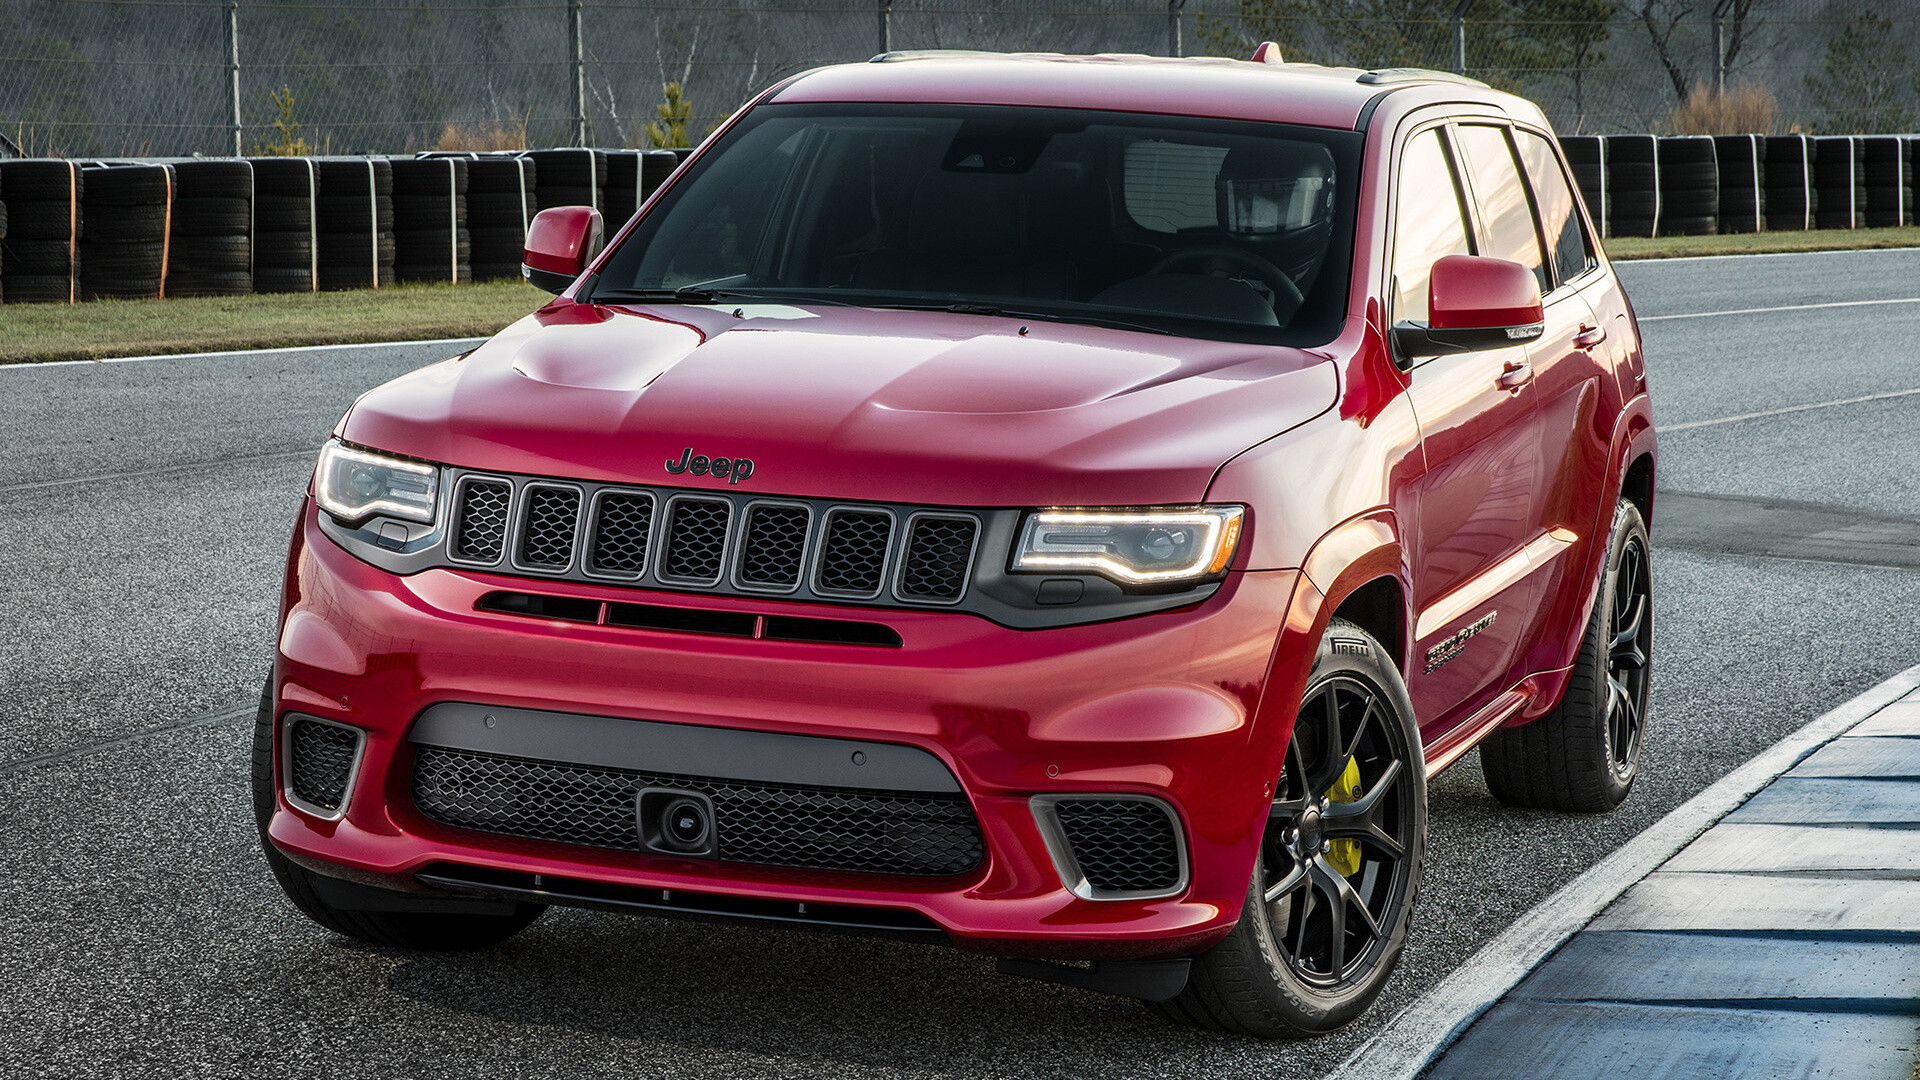 Jeep Grand Cherokee: 2018 Trackhawk, The final trim level available in the lineup. 1920x1080 Full HD Wallpaper.